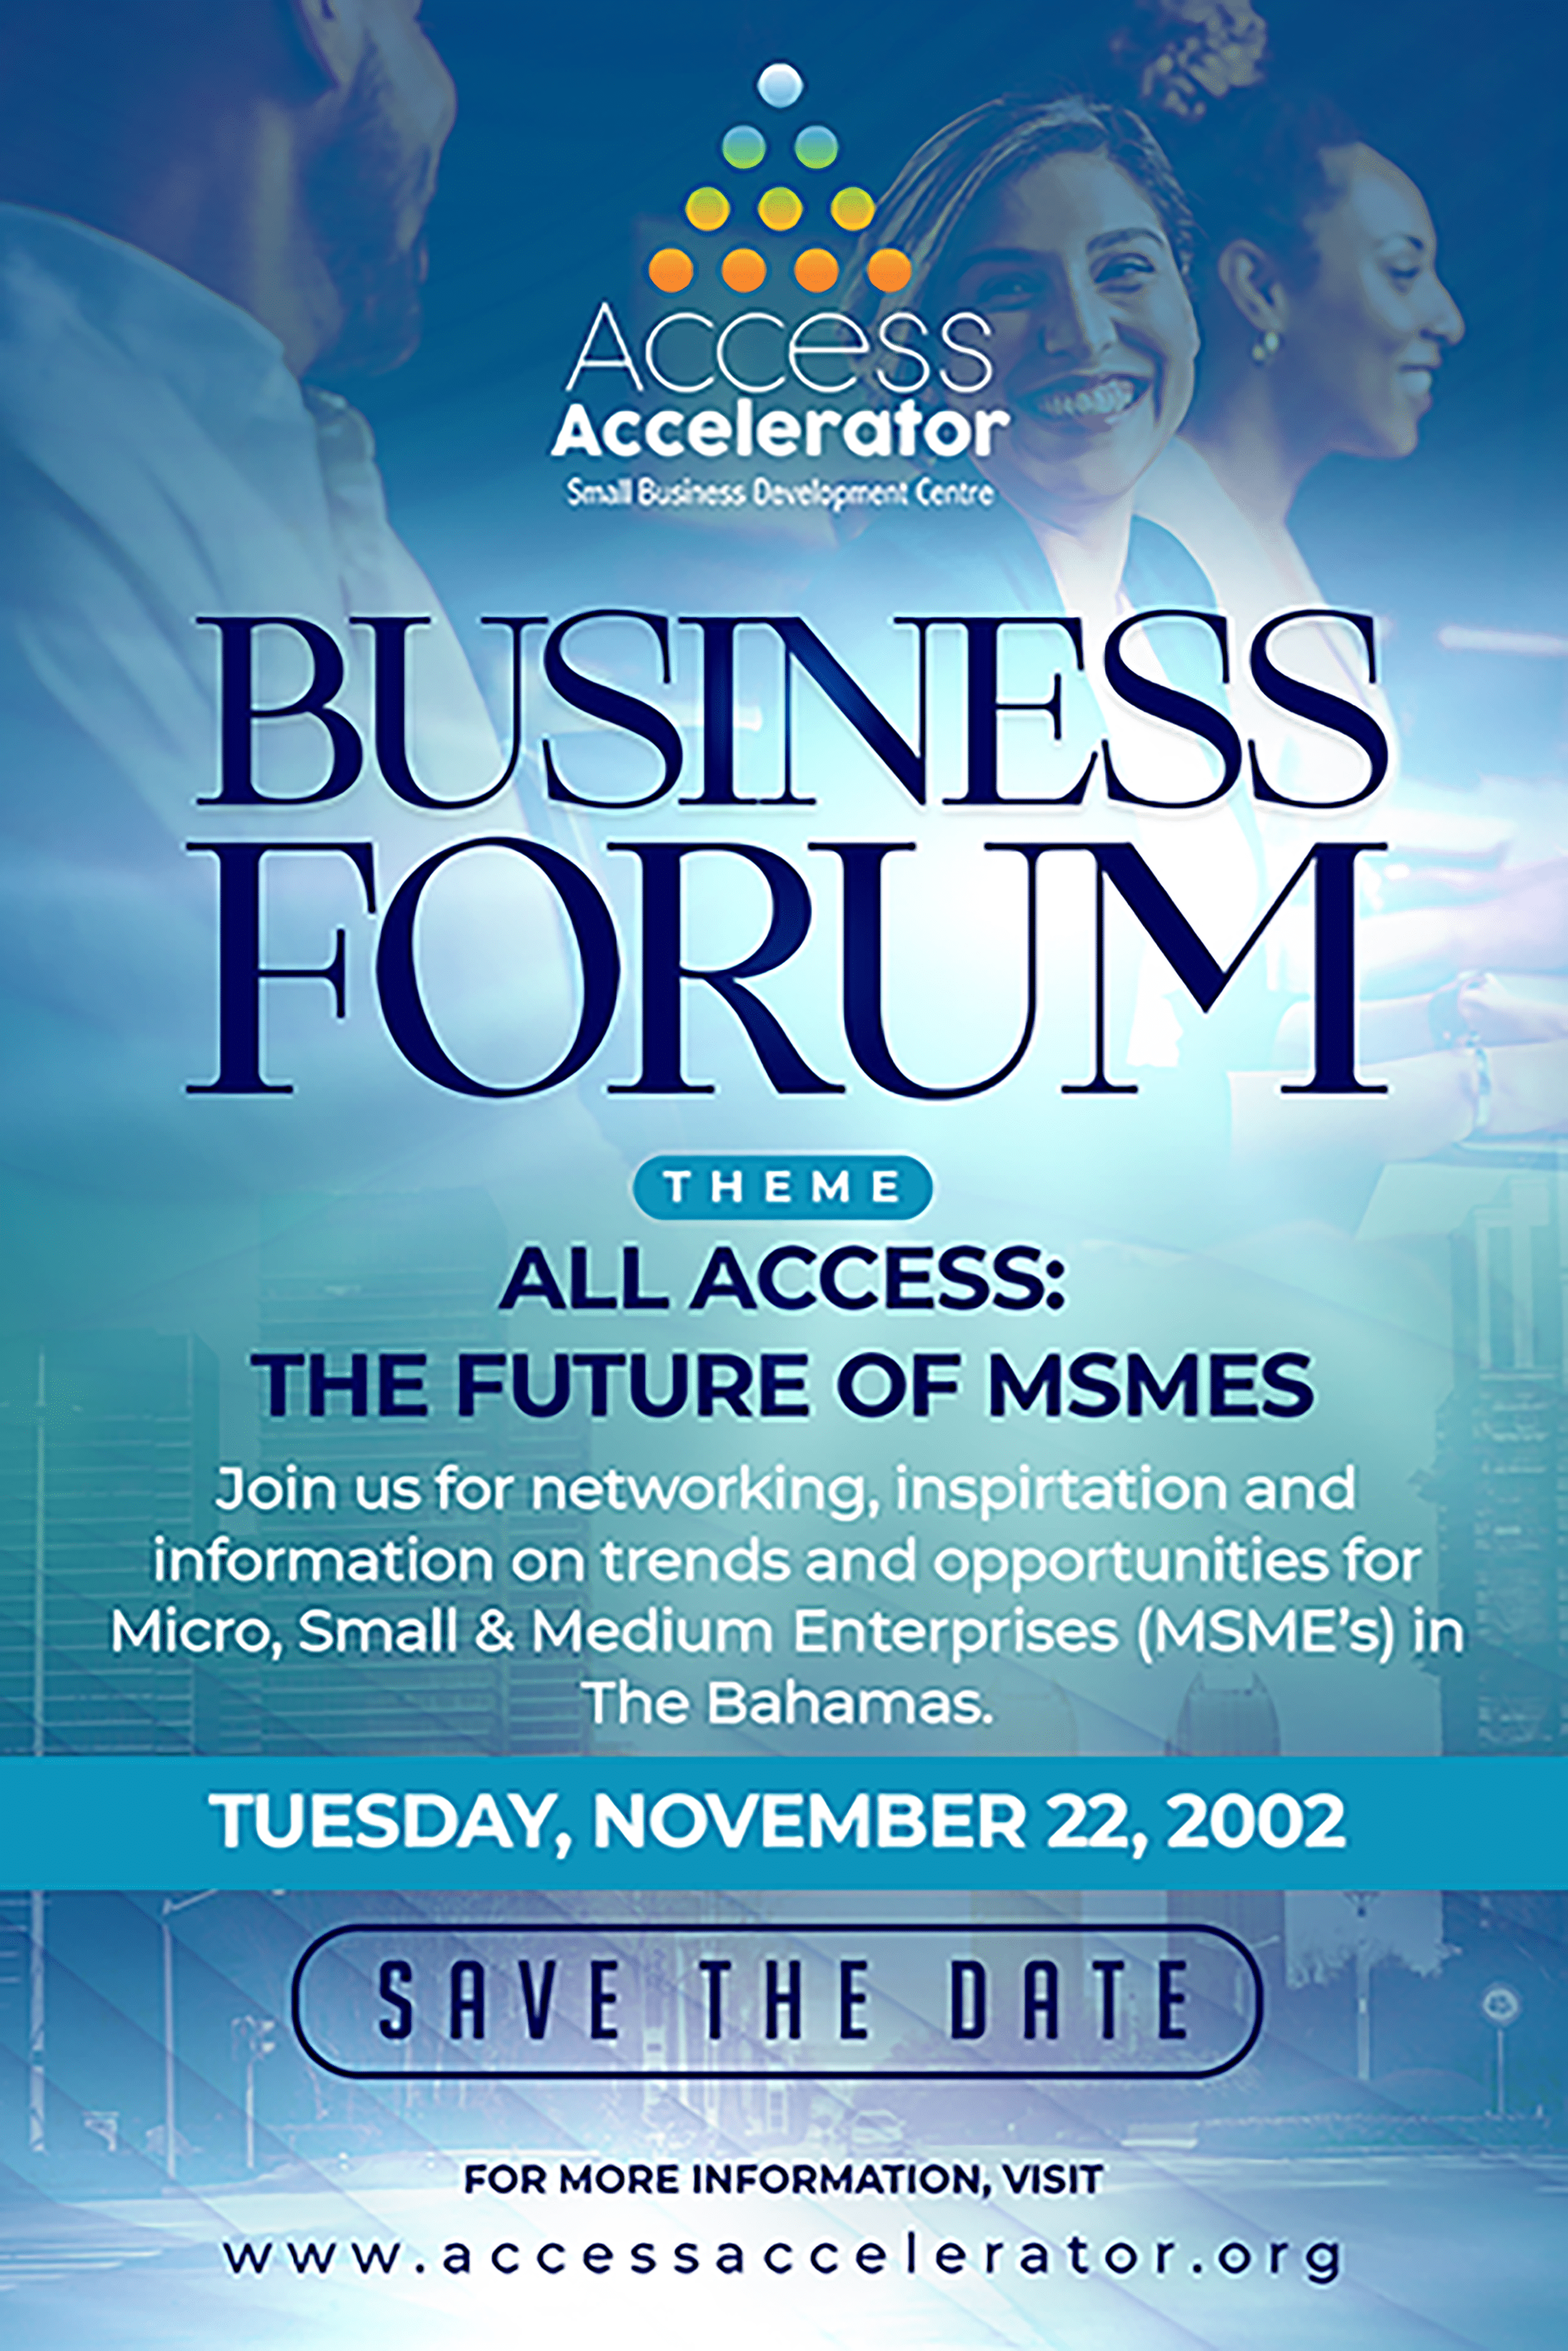 All Access Future MSMEs Event Flier